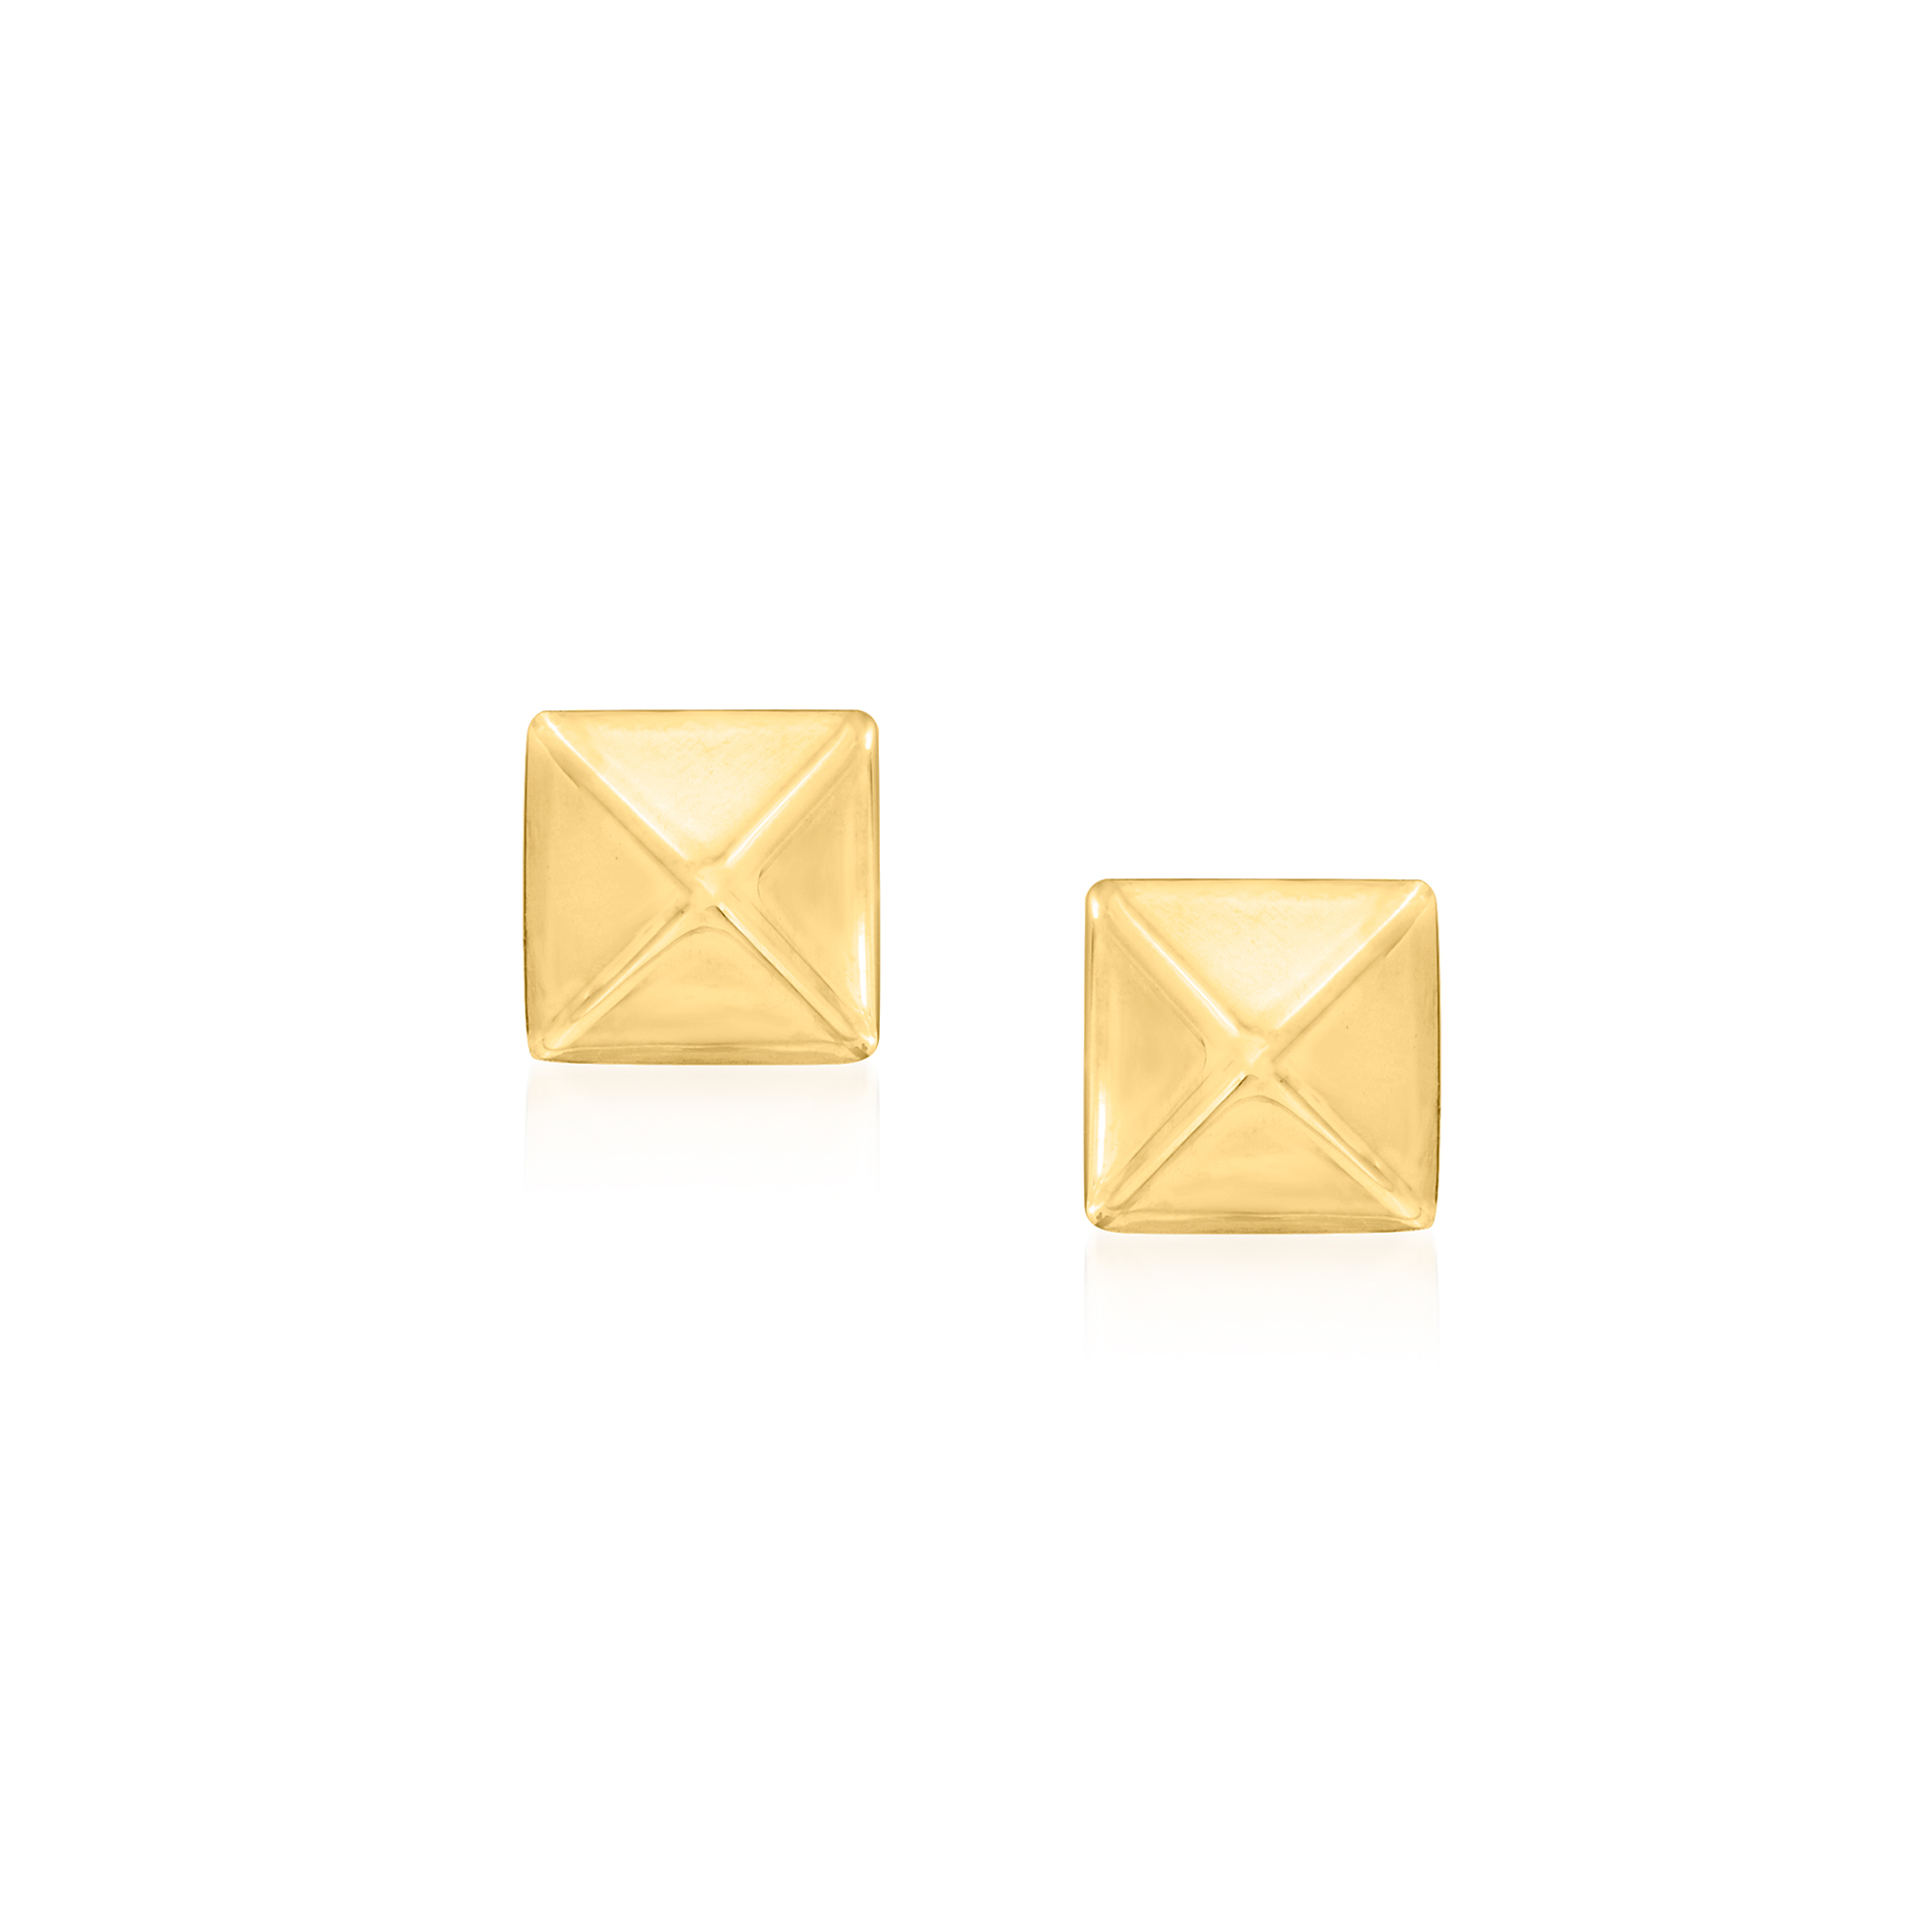 White Gold Dainty Pyramid Stud Earrings, 8 mm